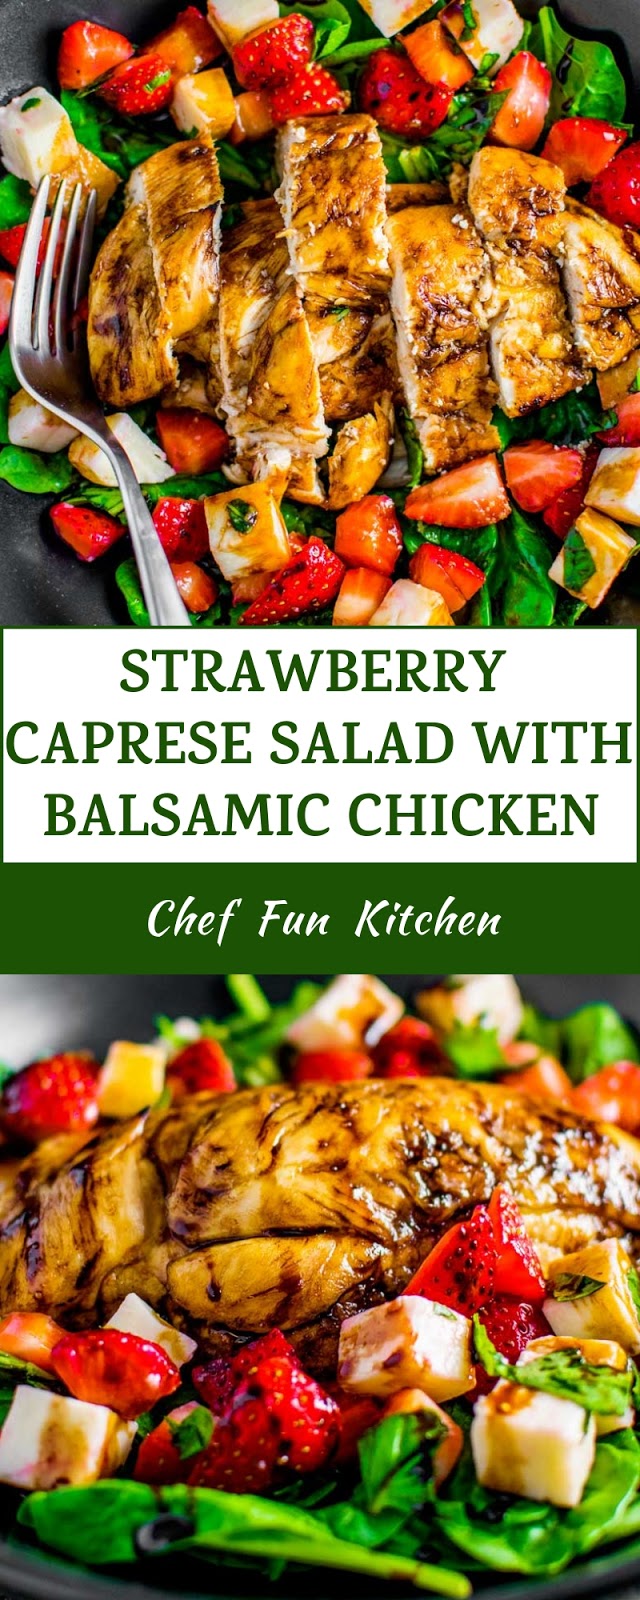 STRAWBERRY CAPRESE SALAD WITH BALSAMIC CHICKEN